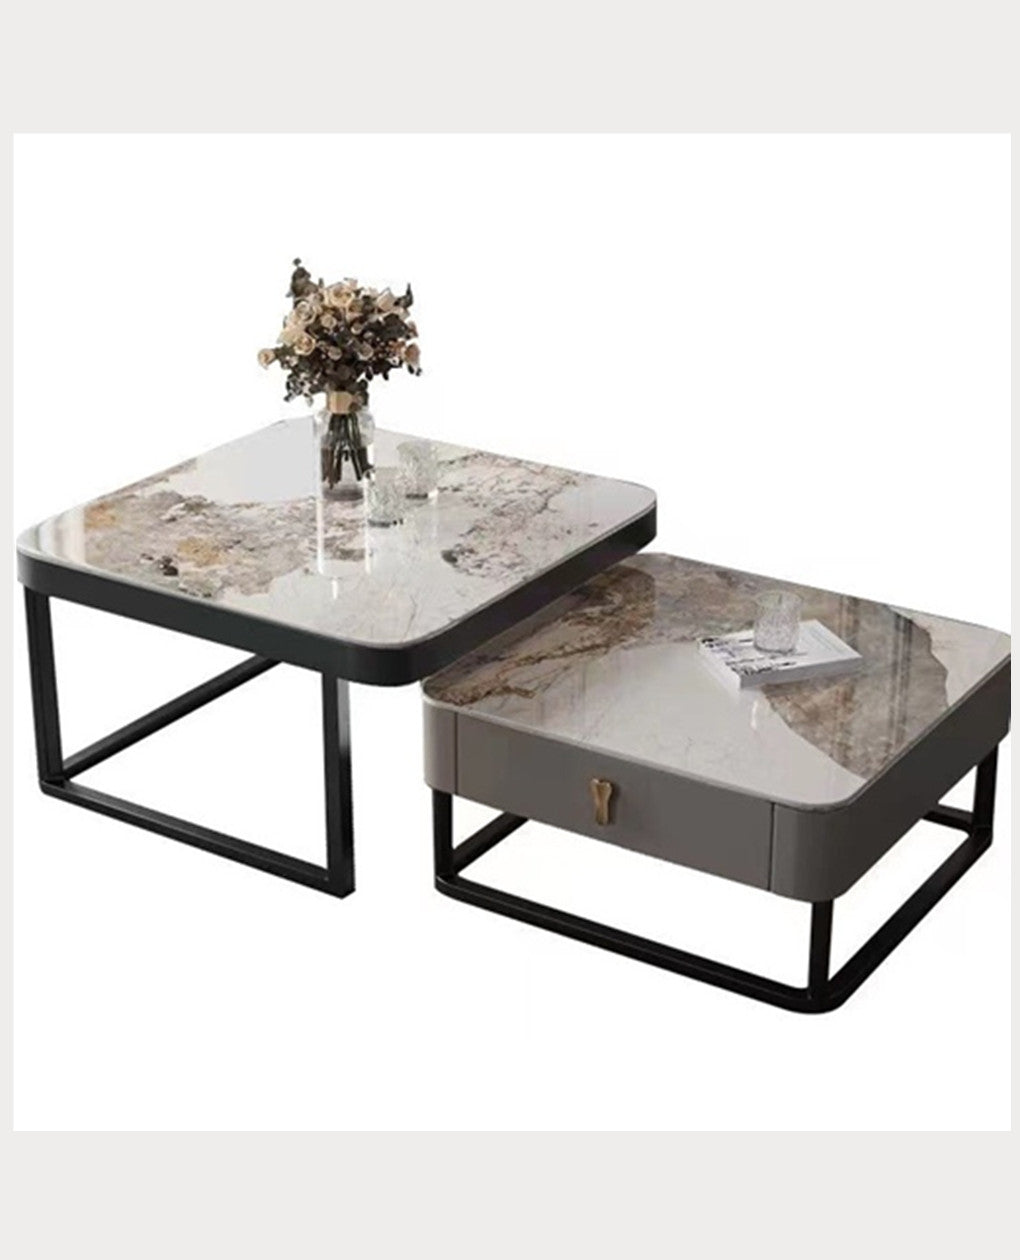 Daniel Sintered Stone Top 2PC Coffee Table Set With Storage Drawer Steel Frame